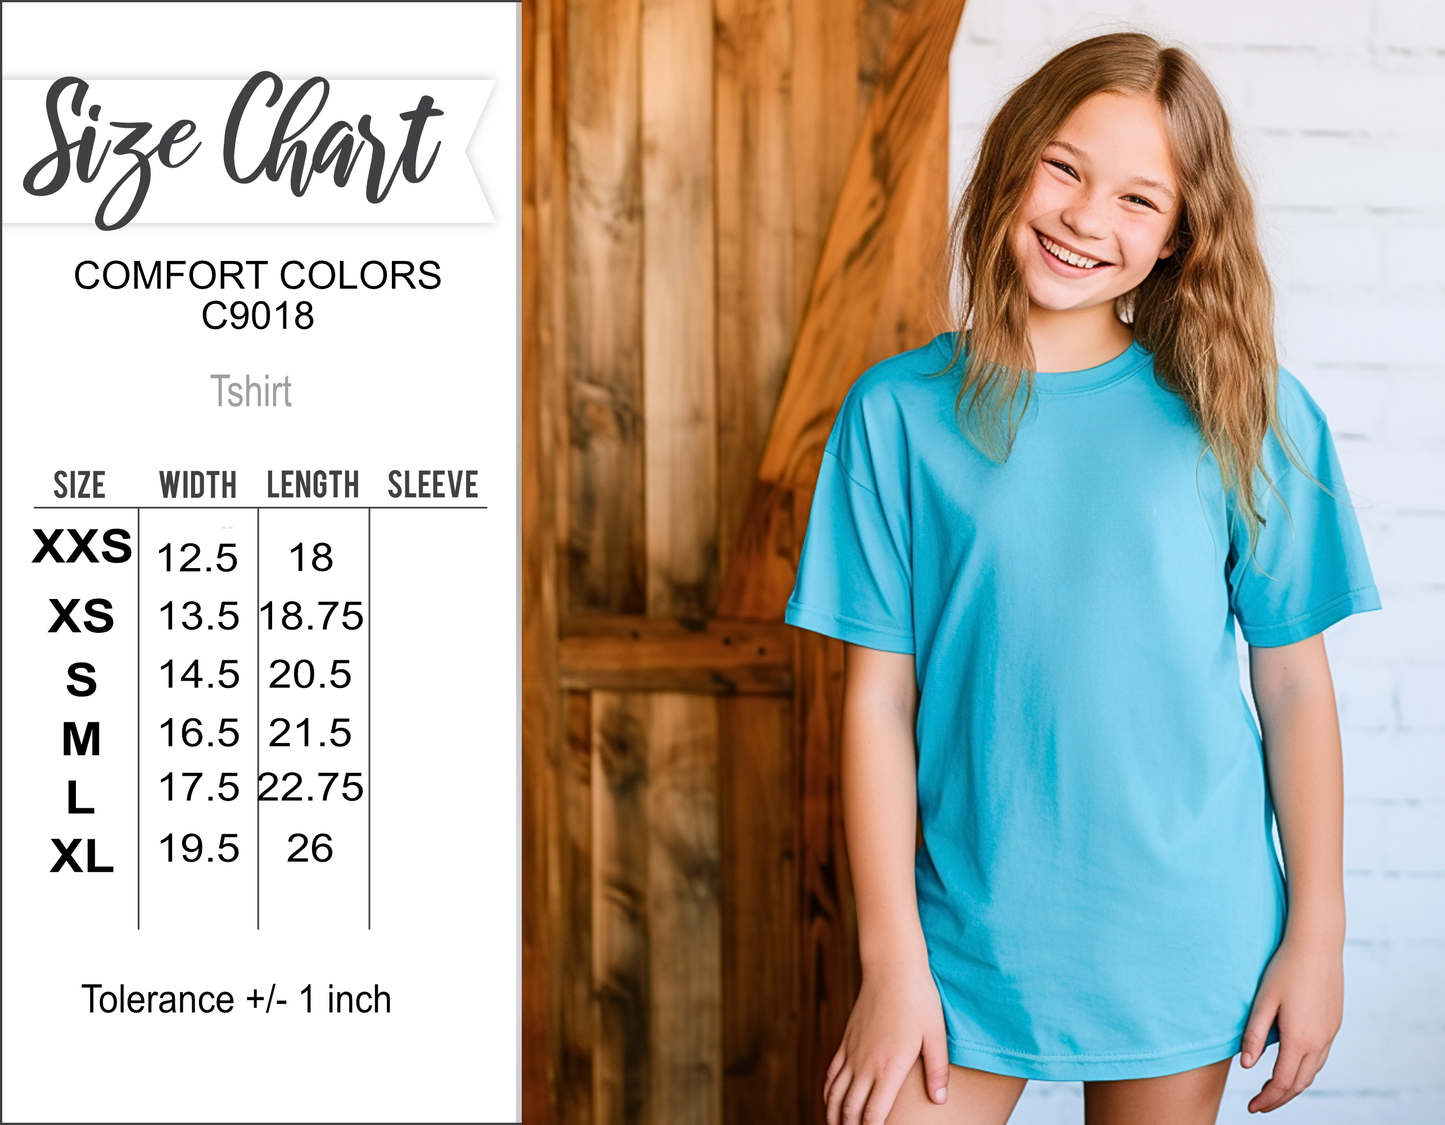 Lights Up 'til January - Adult & Youth Comfort Colors Tee